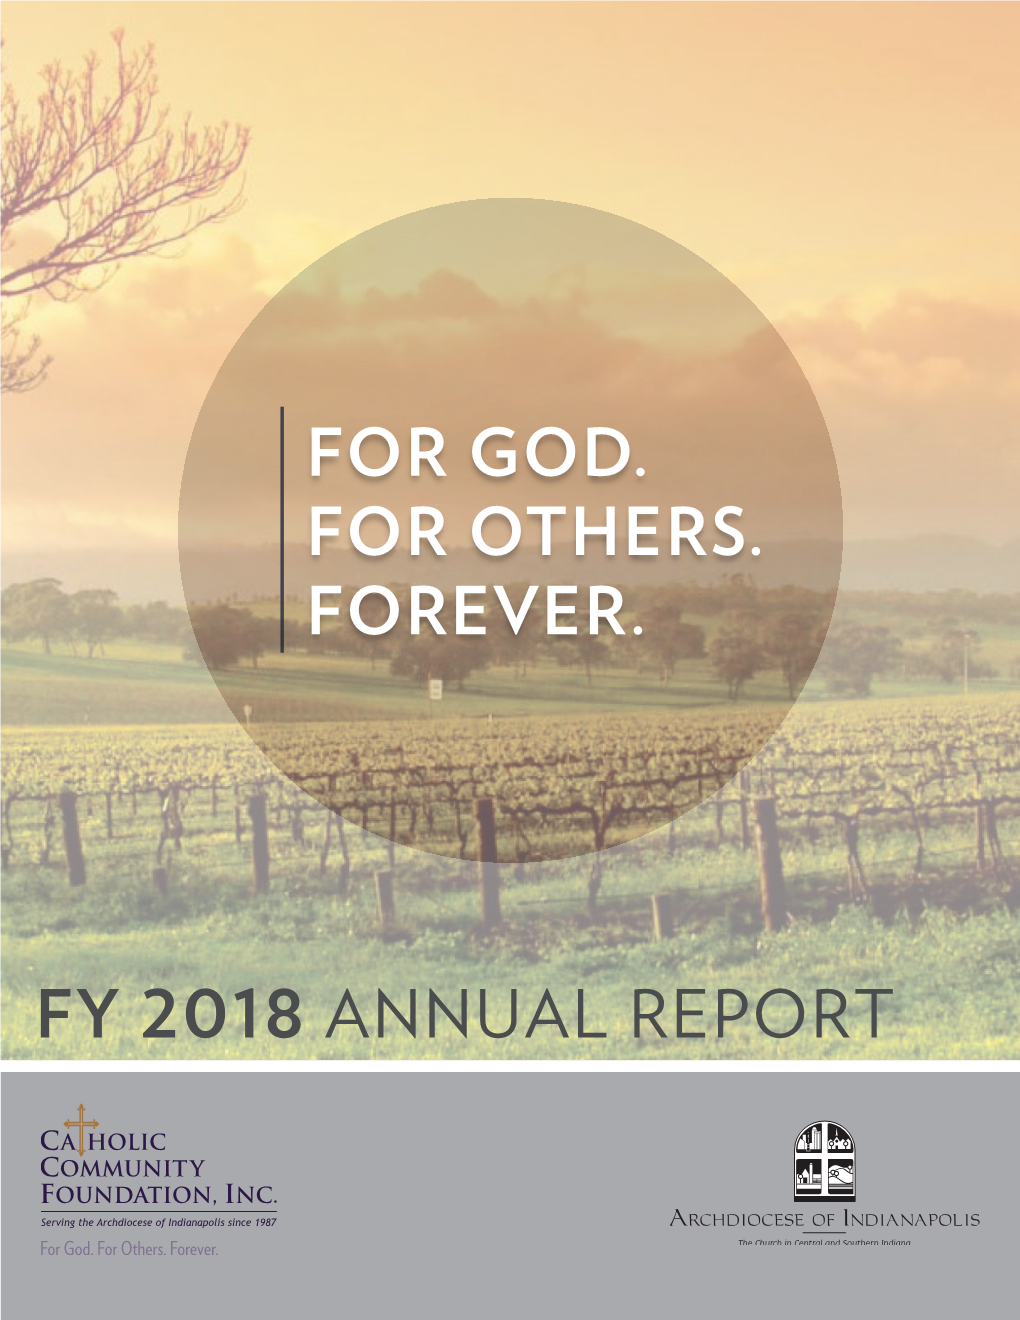 Fy 2018 Annual Report for God